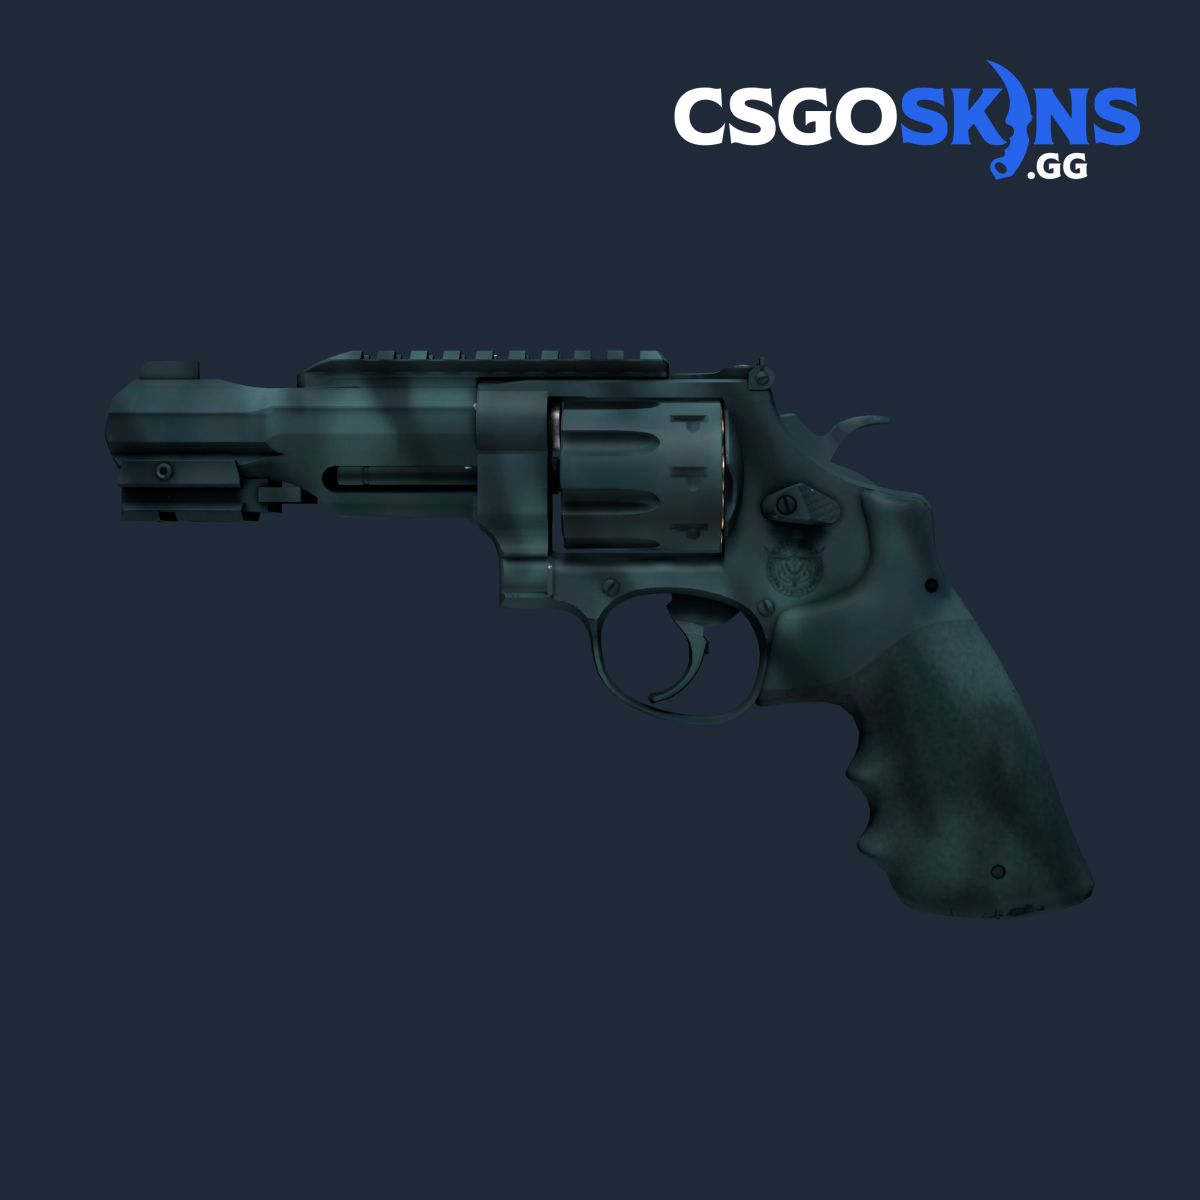 R8 Revolver Canal Spray cs go skin download the last version for windows